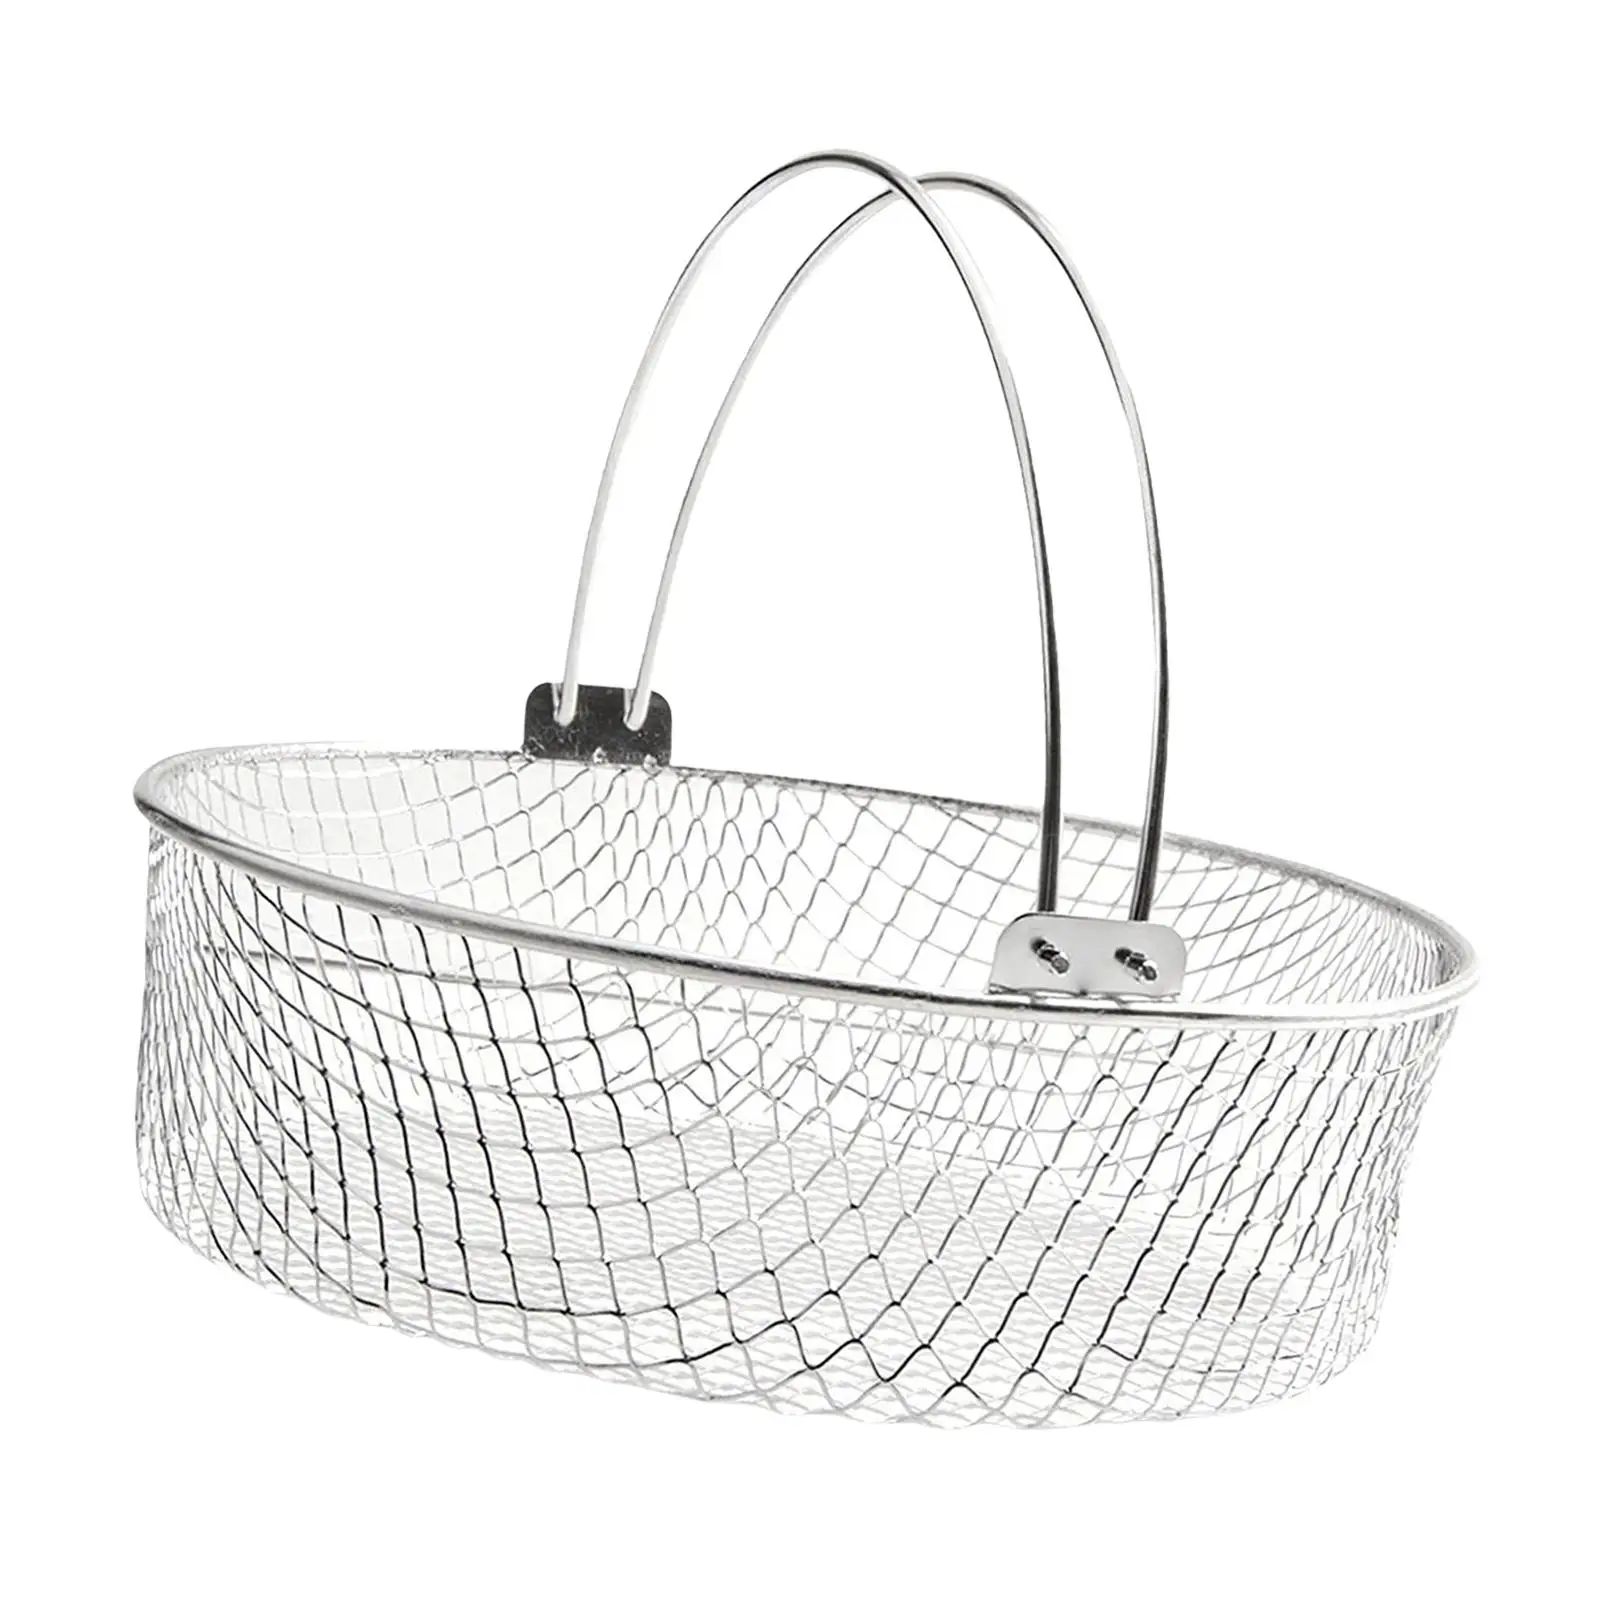  Basket W/ Handle Liners Strainer Colander Insert Accessories  Tools Deep Fry Mesh Basket for French Fries Meats Grilling